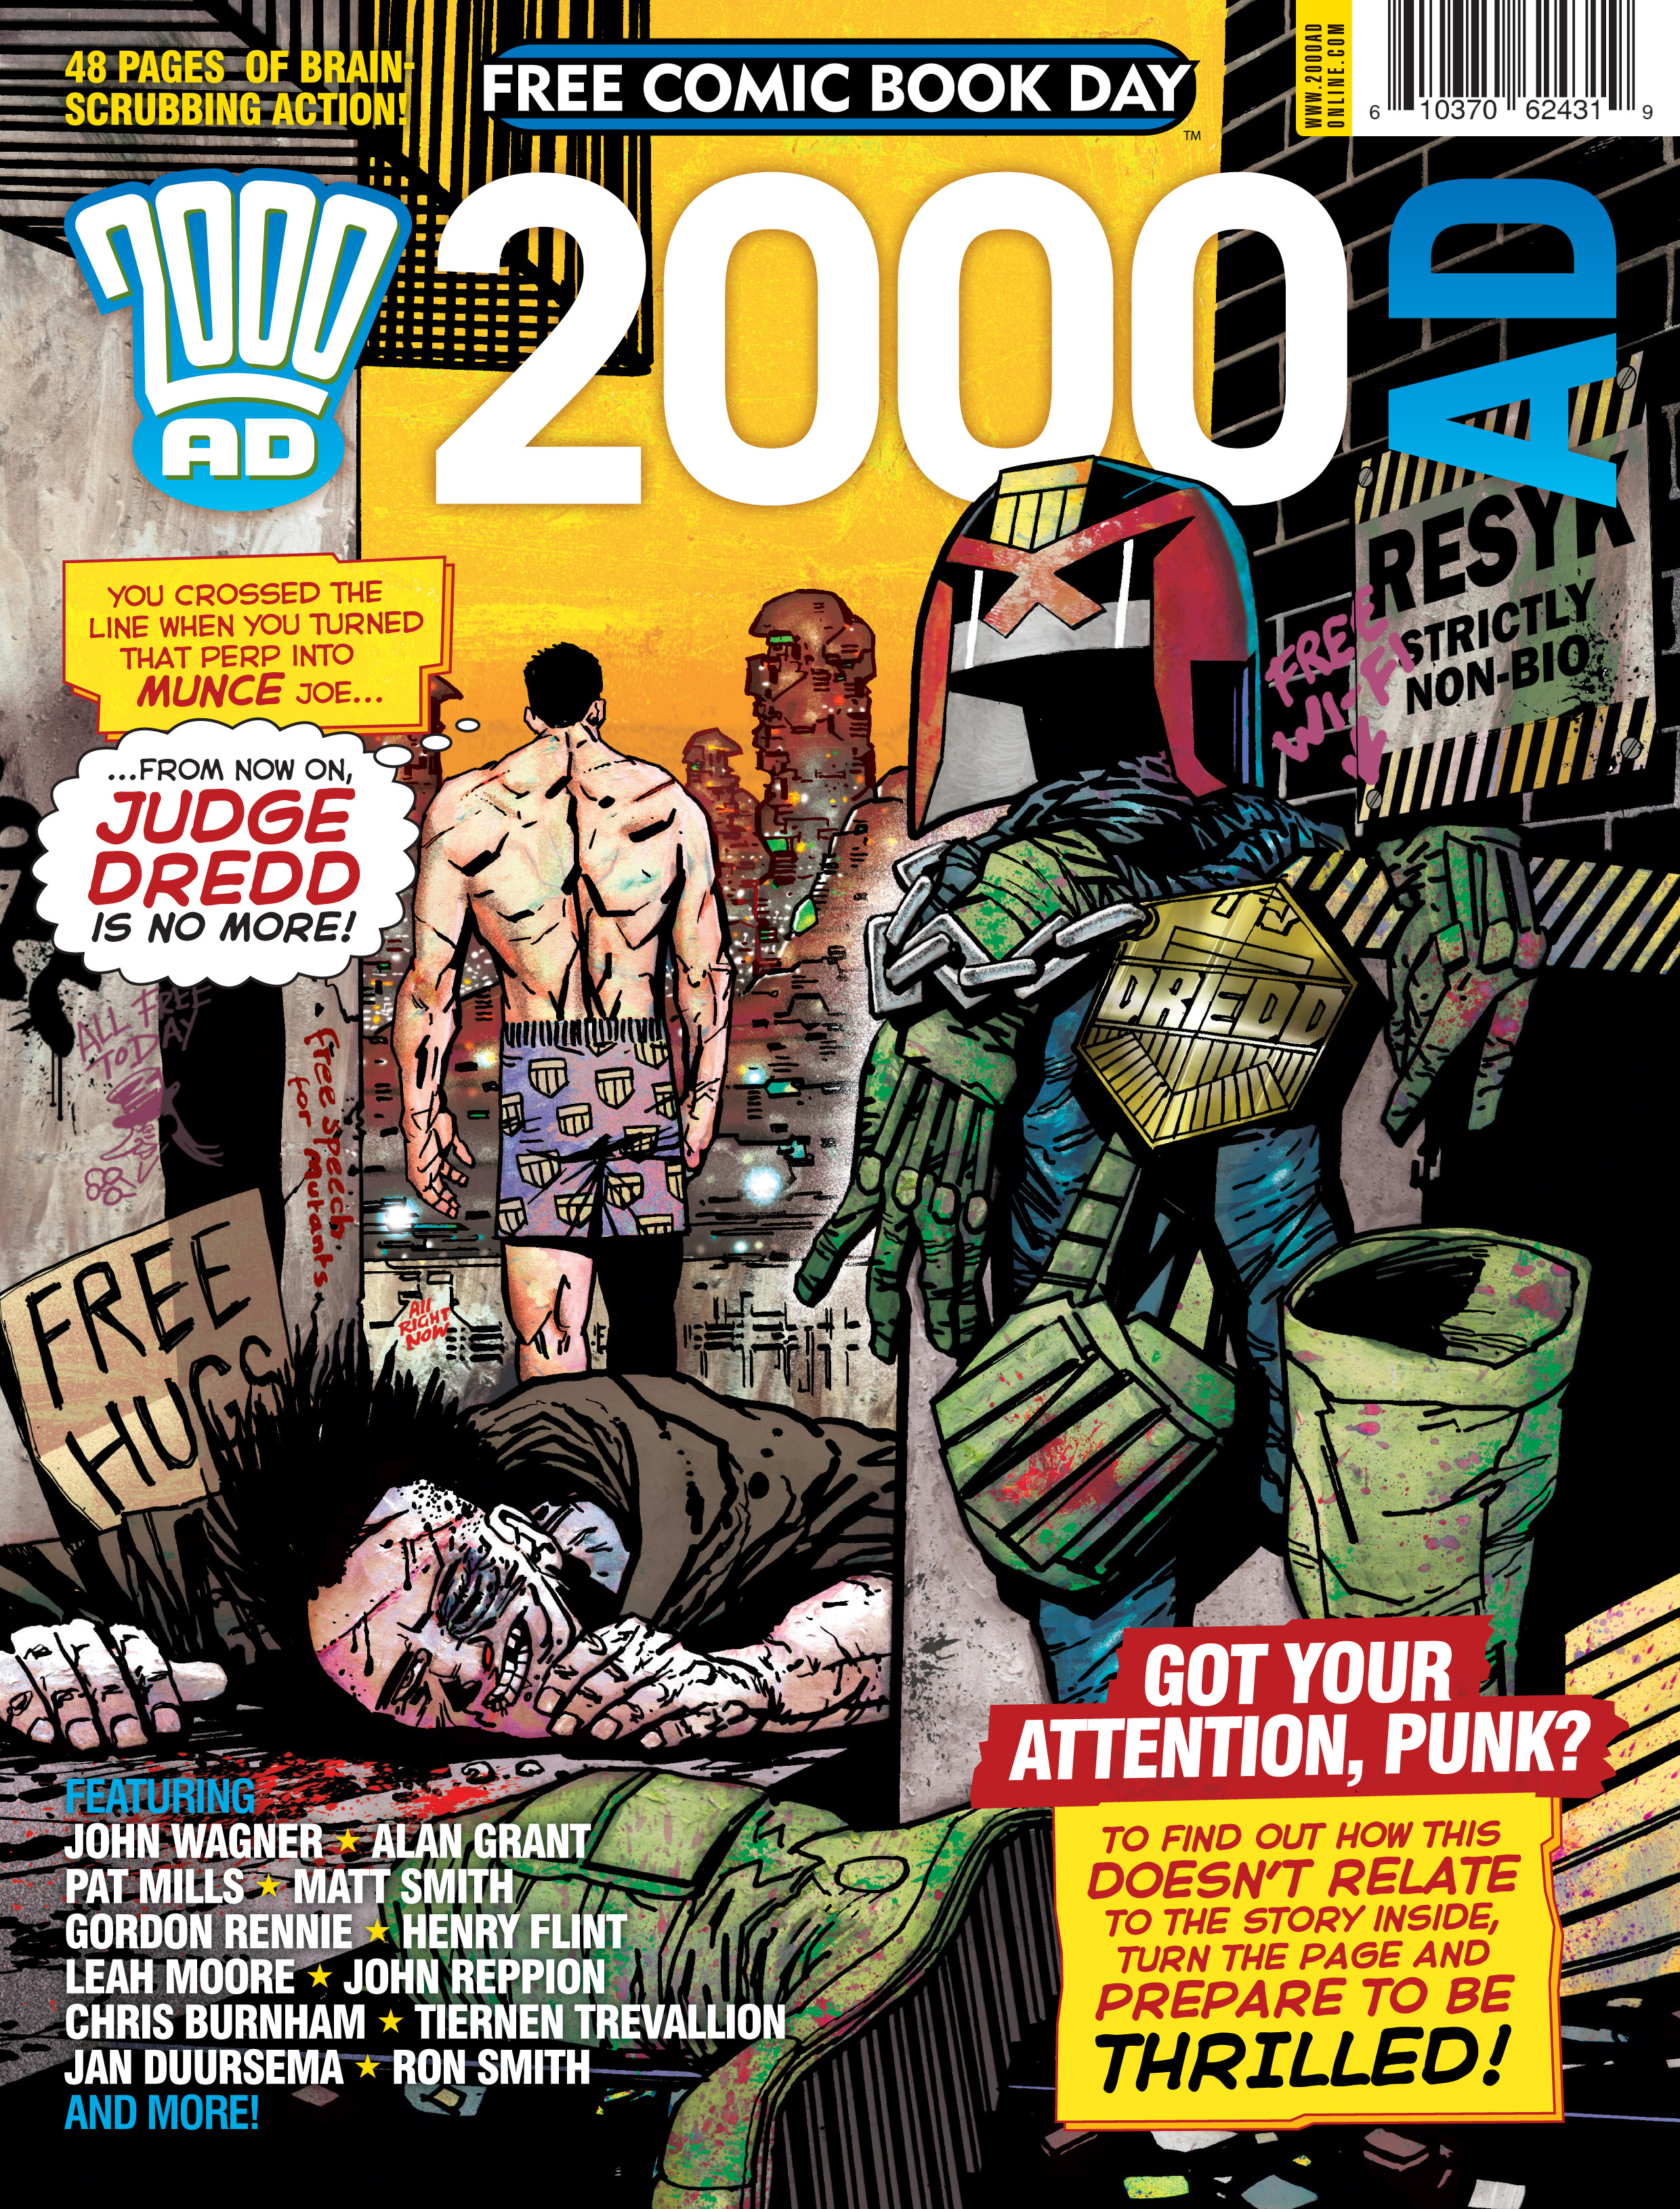 Read online Free Comic Book Day 2014 comic -  Issue # 2000 AD - 1